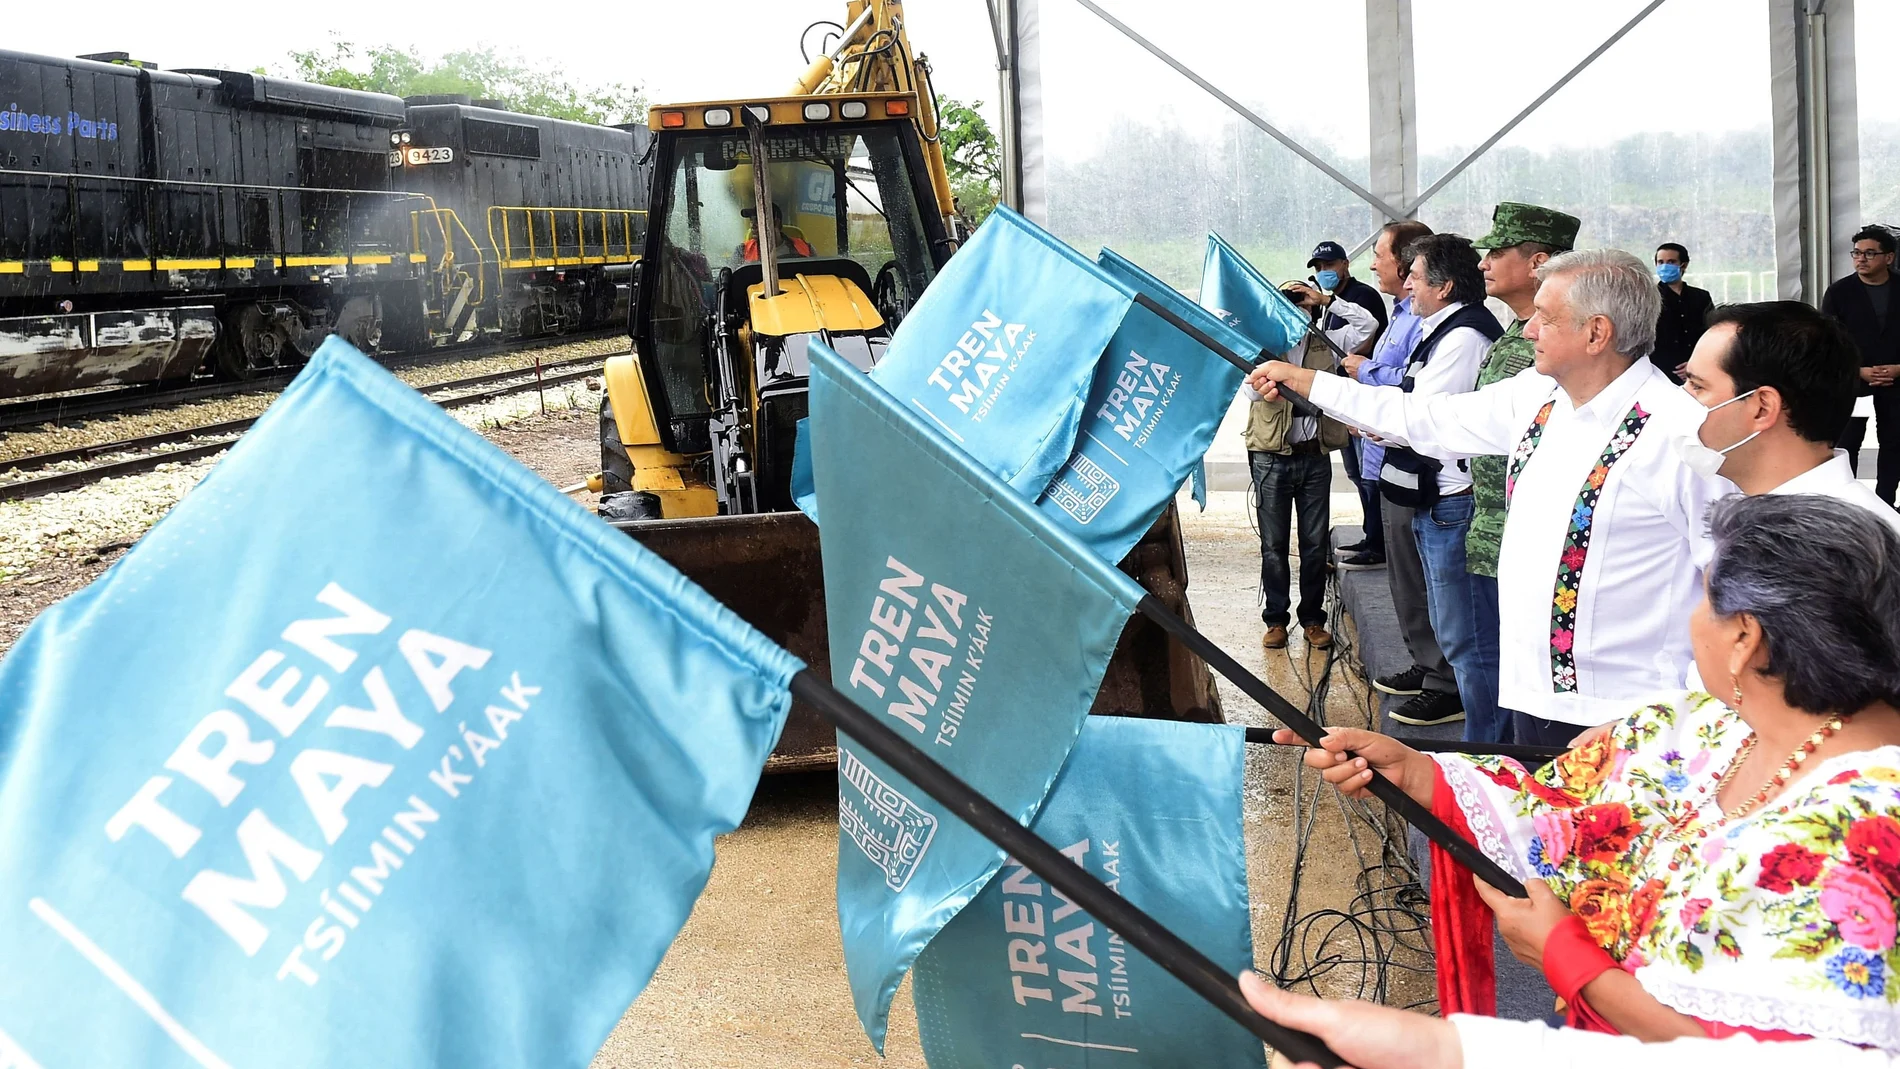 Mexico's President Andres Manuel Lopez Obrador waves a flag during the start of the third section of the construction of the Mayan Train railroad project, in Maxcanu